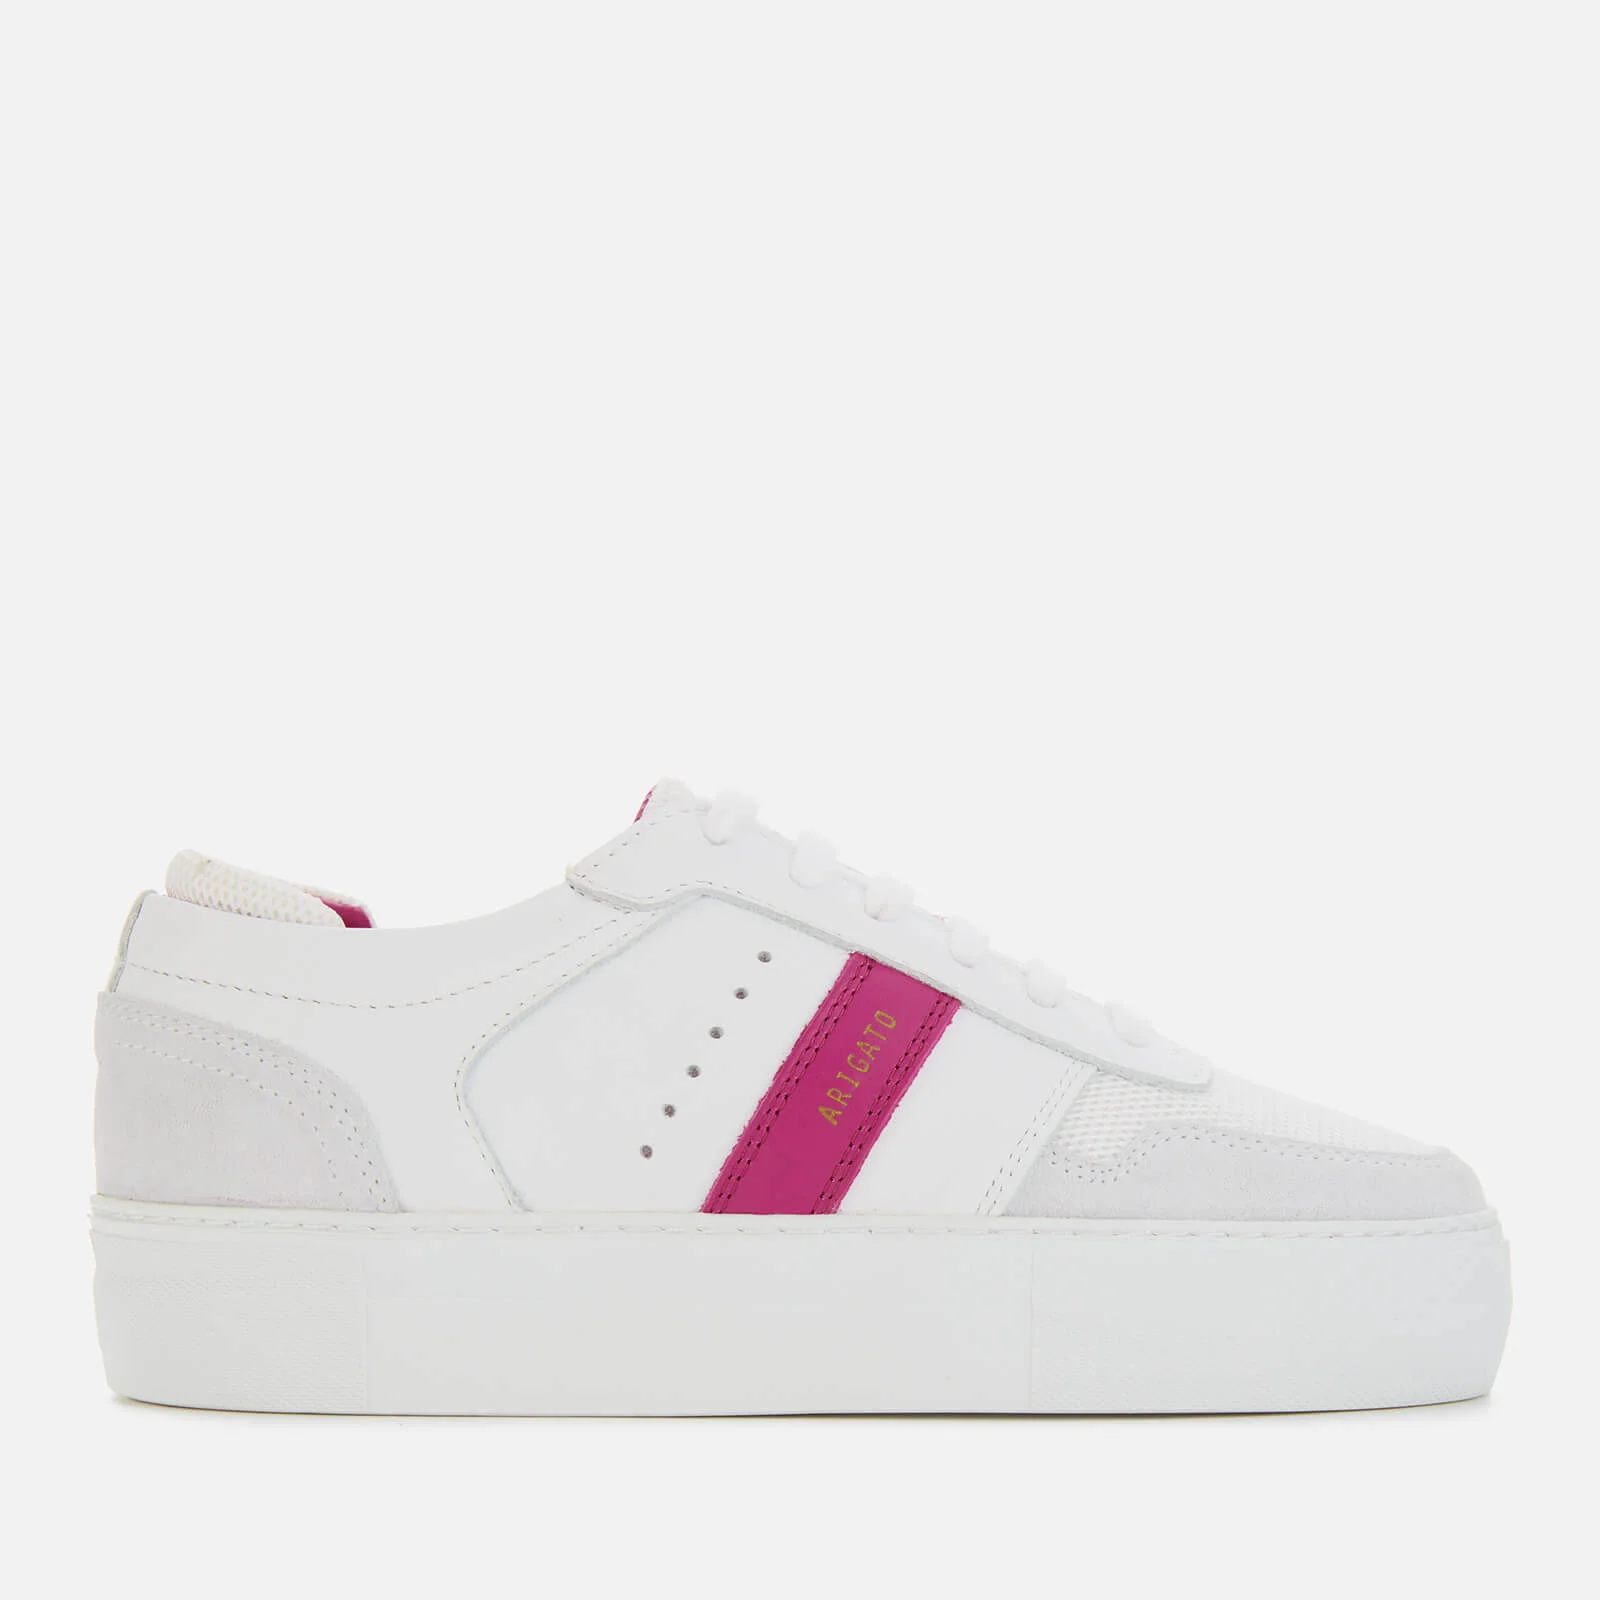 Axel Arigato Women's Leather Platform Trainers - White/Pink Image 1